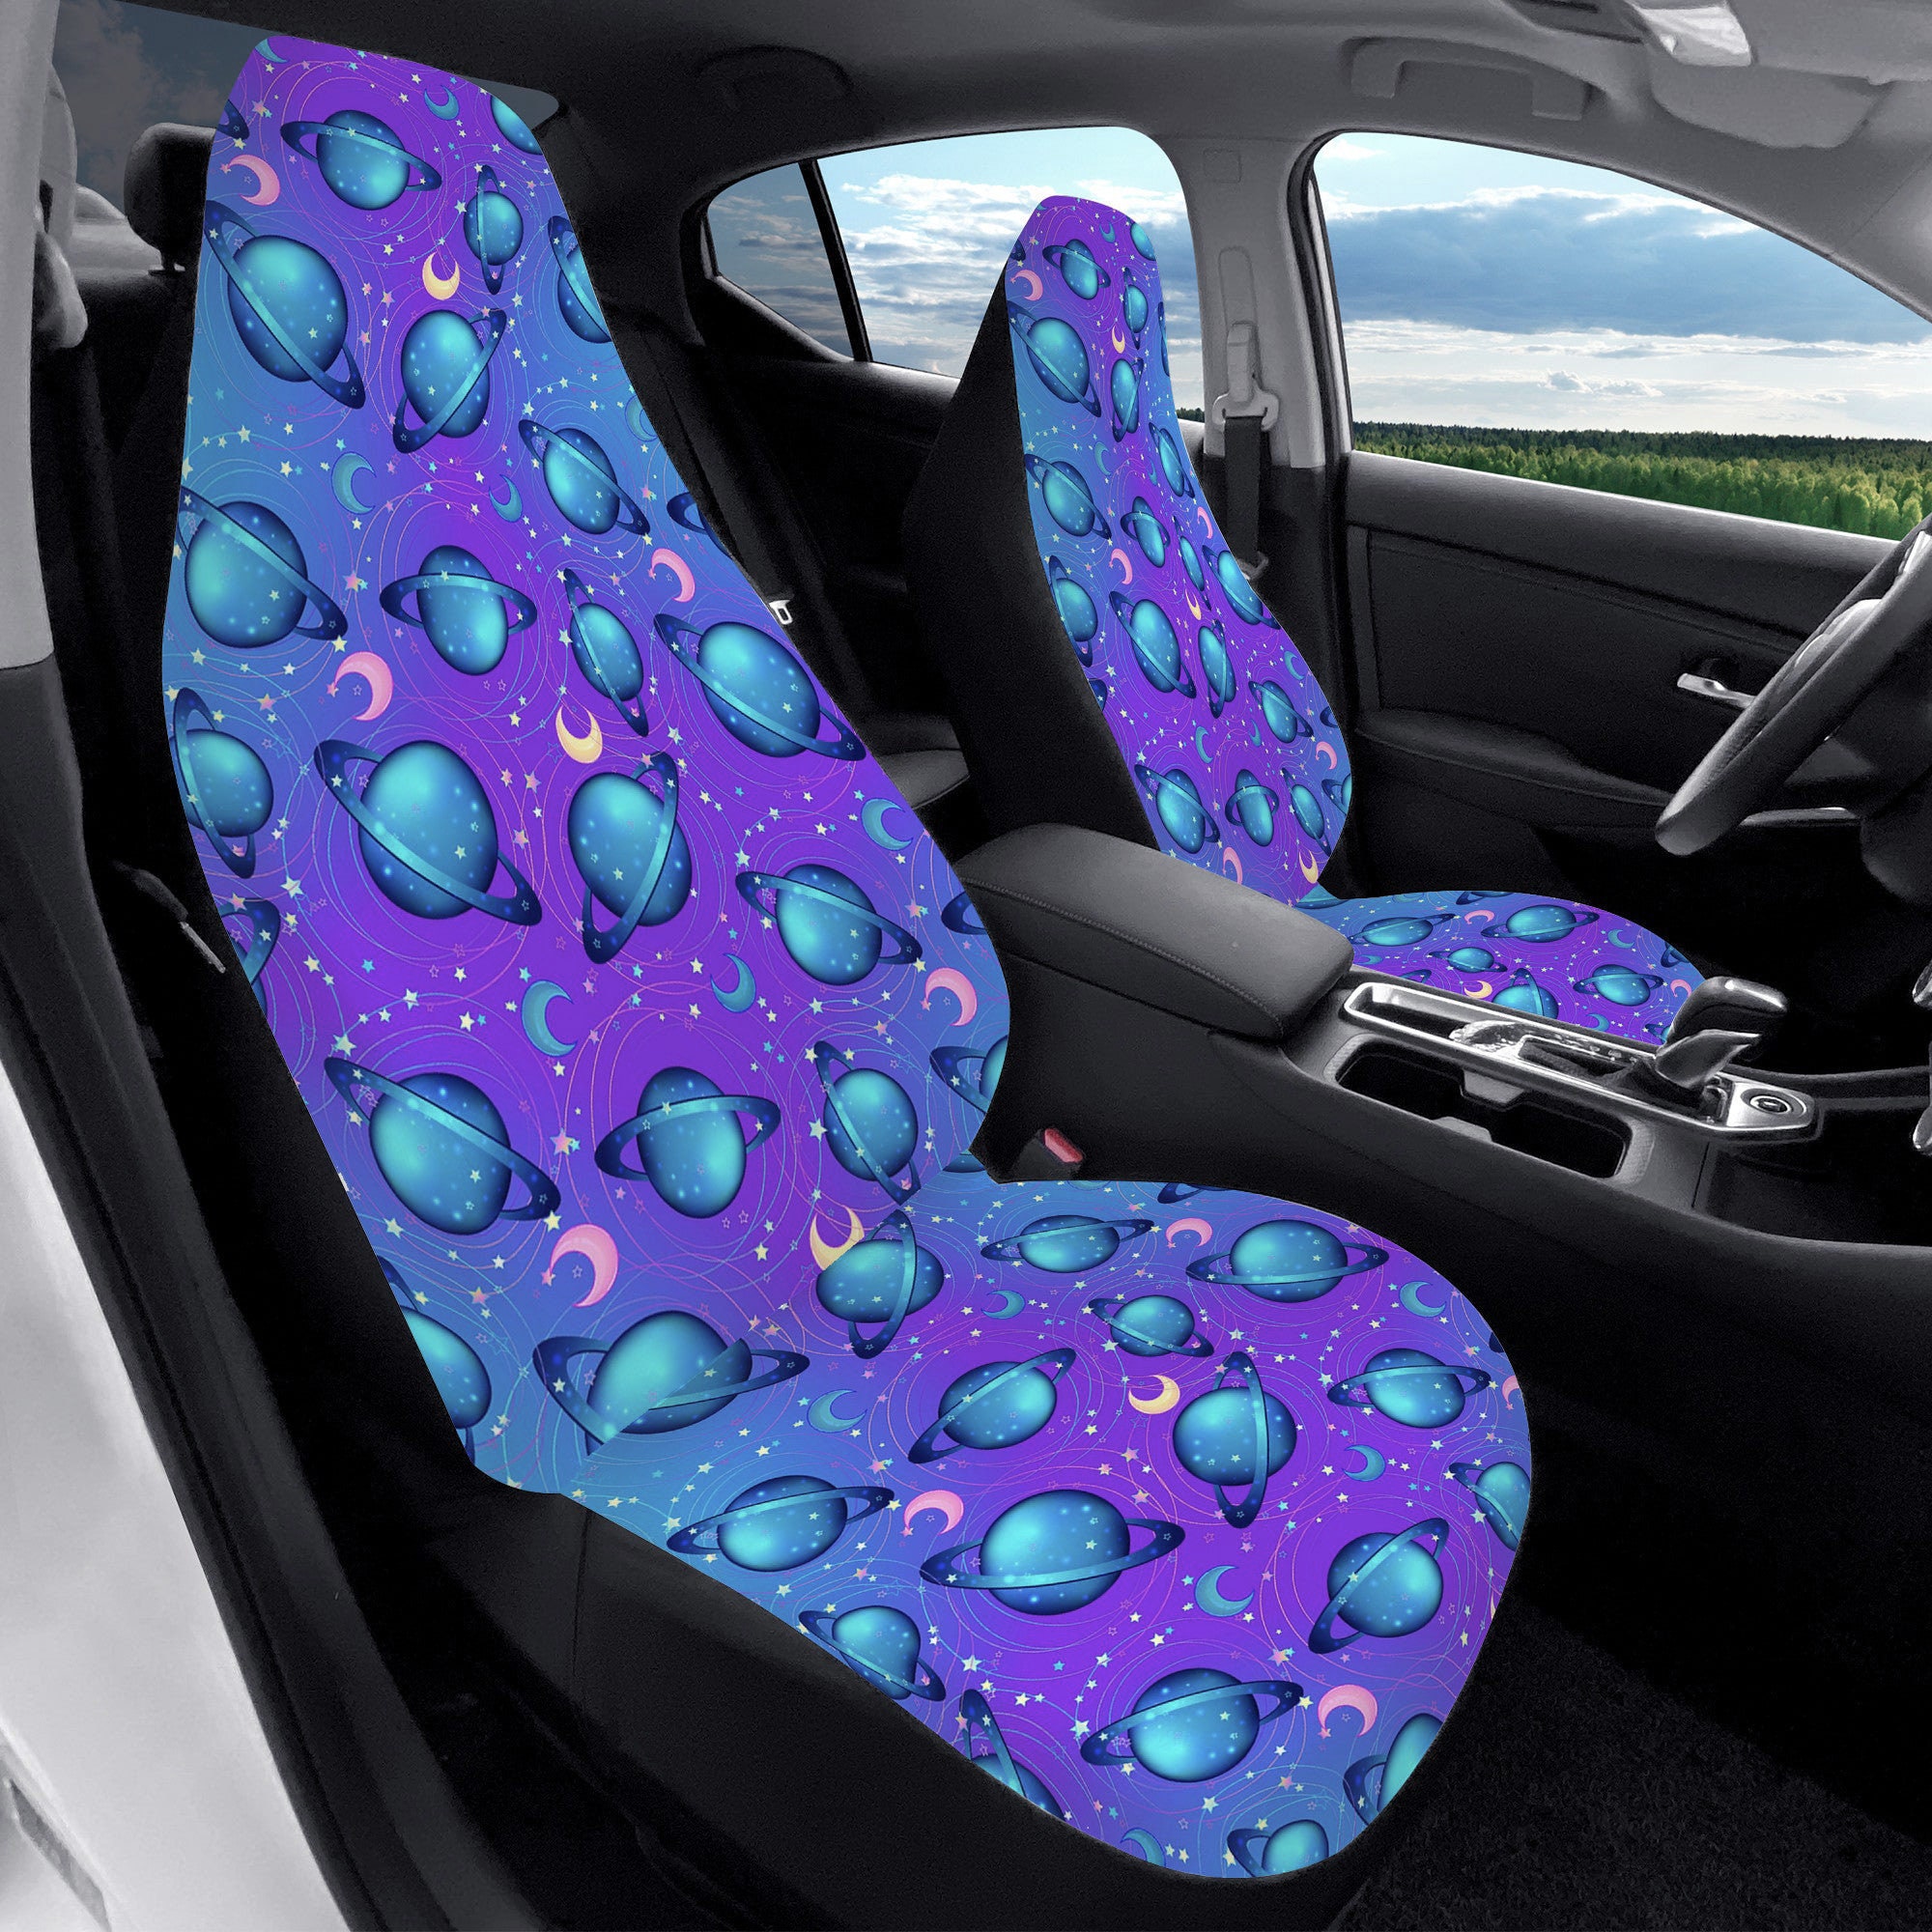 Moon Car Seat Covers For Vehicle | Magic Witchy Astronomy Seat Covers